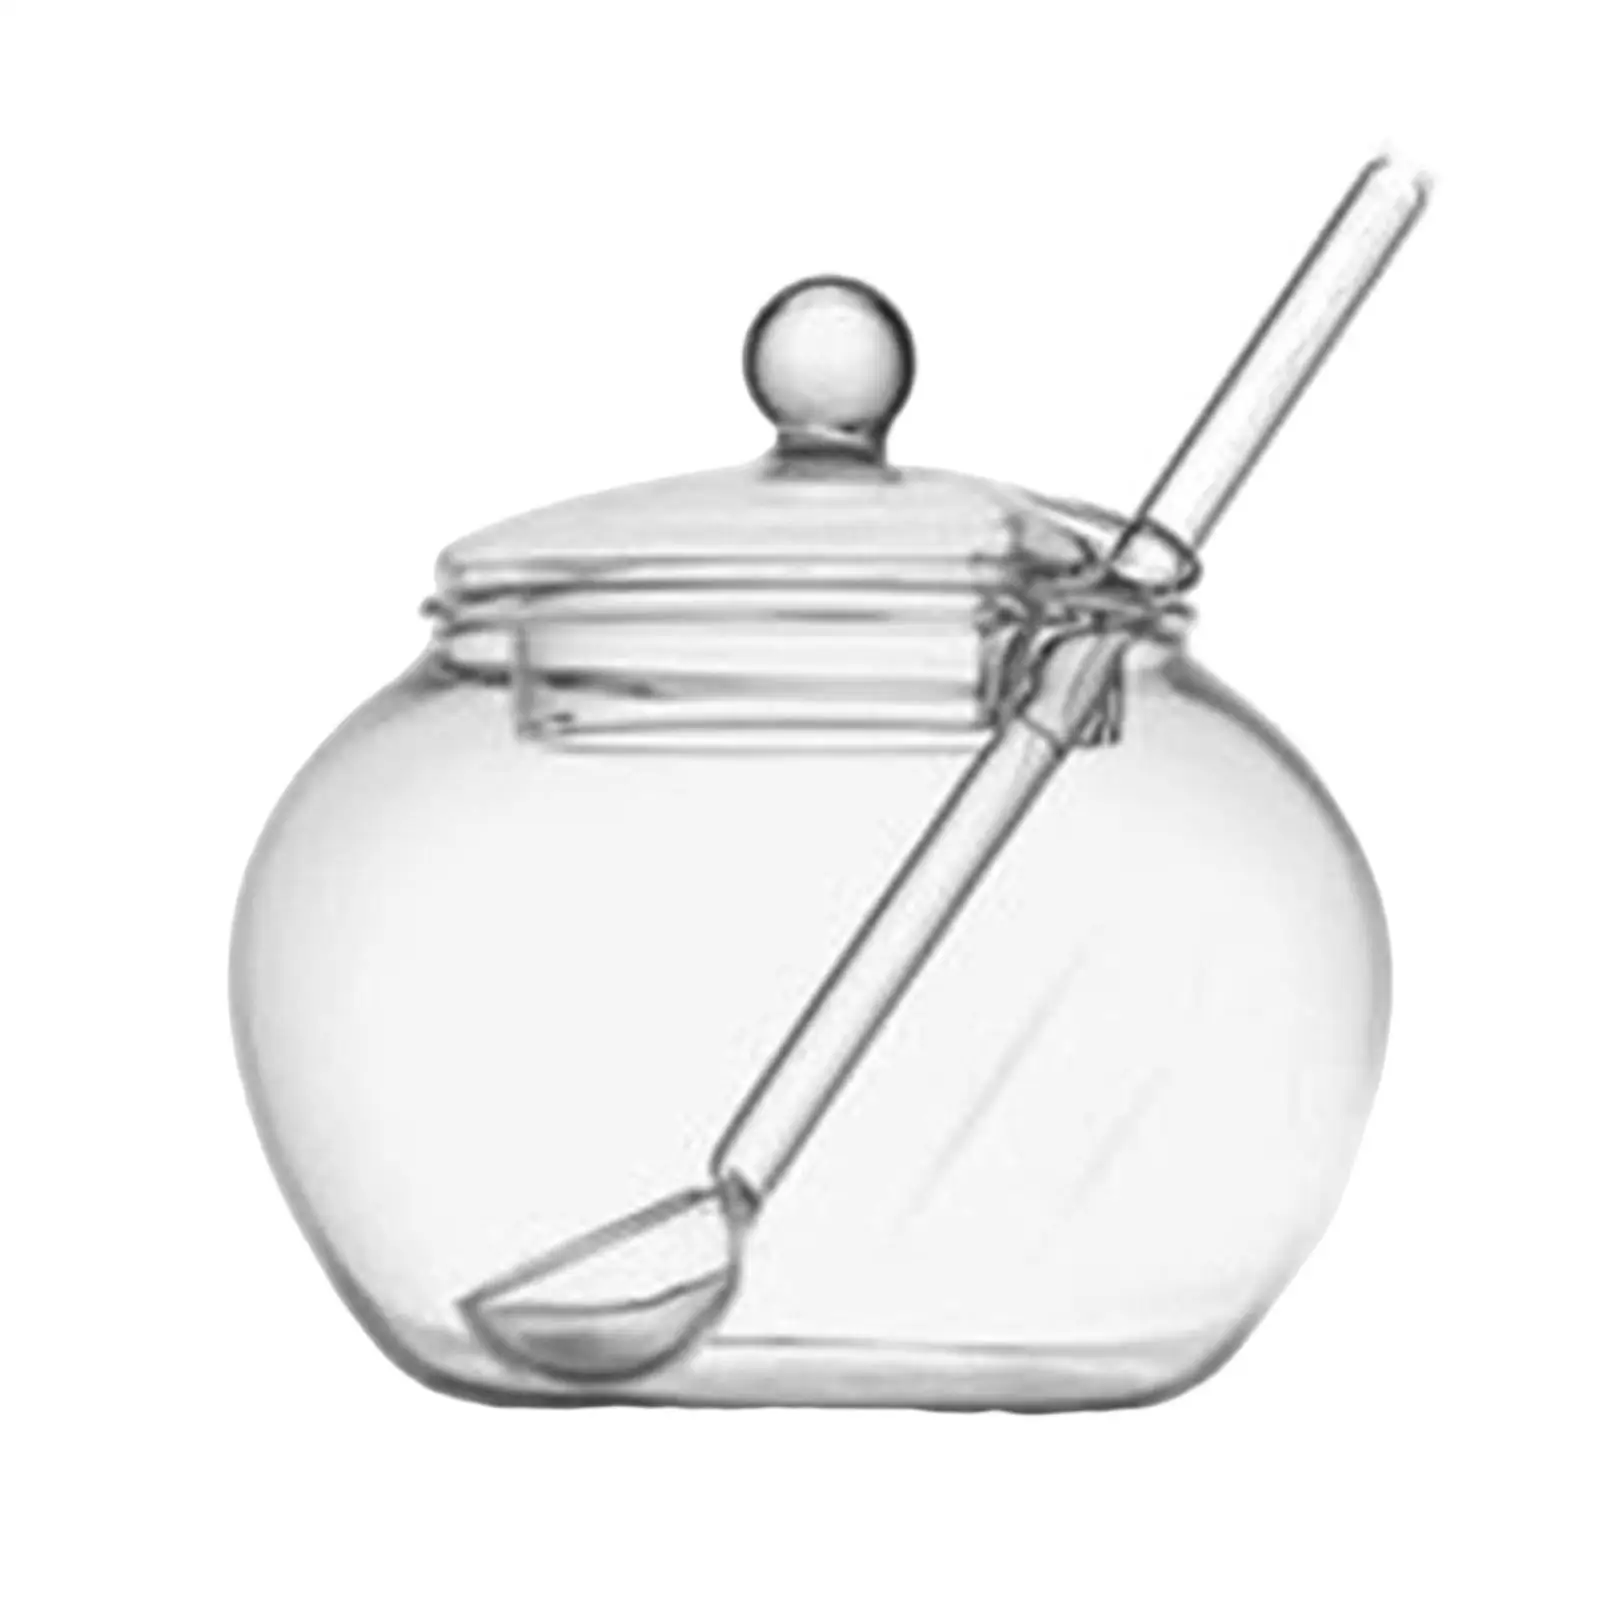 Jar Cylinder Transparent with Glass Lid and Spoon Home Storage Organization for Household Kitchen